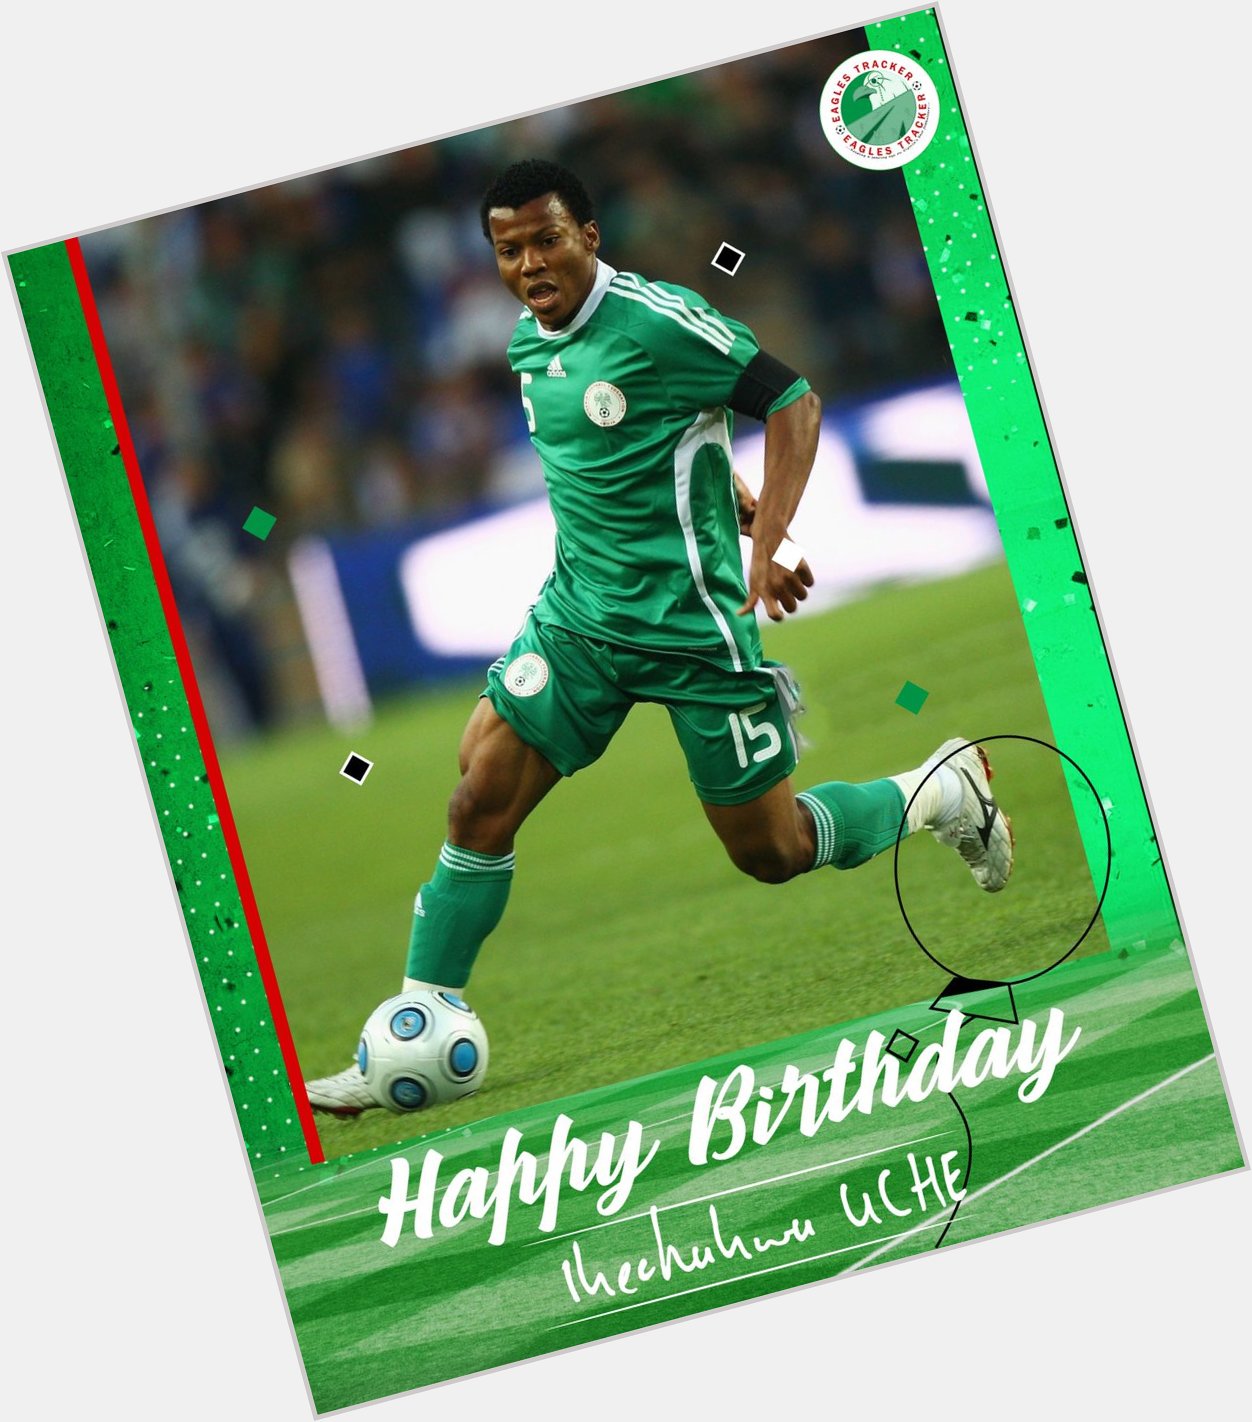  46 Caps  19 Goals 1 AFCON (2013)

Happy Birthday to former Super Eagles striker, Ikechukwu Uche 